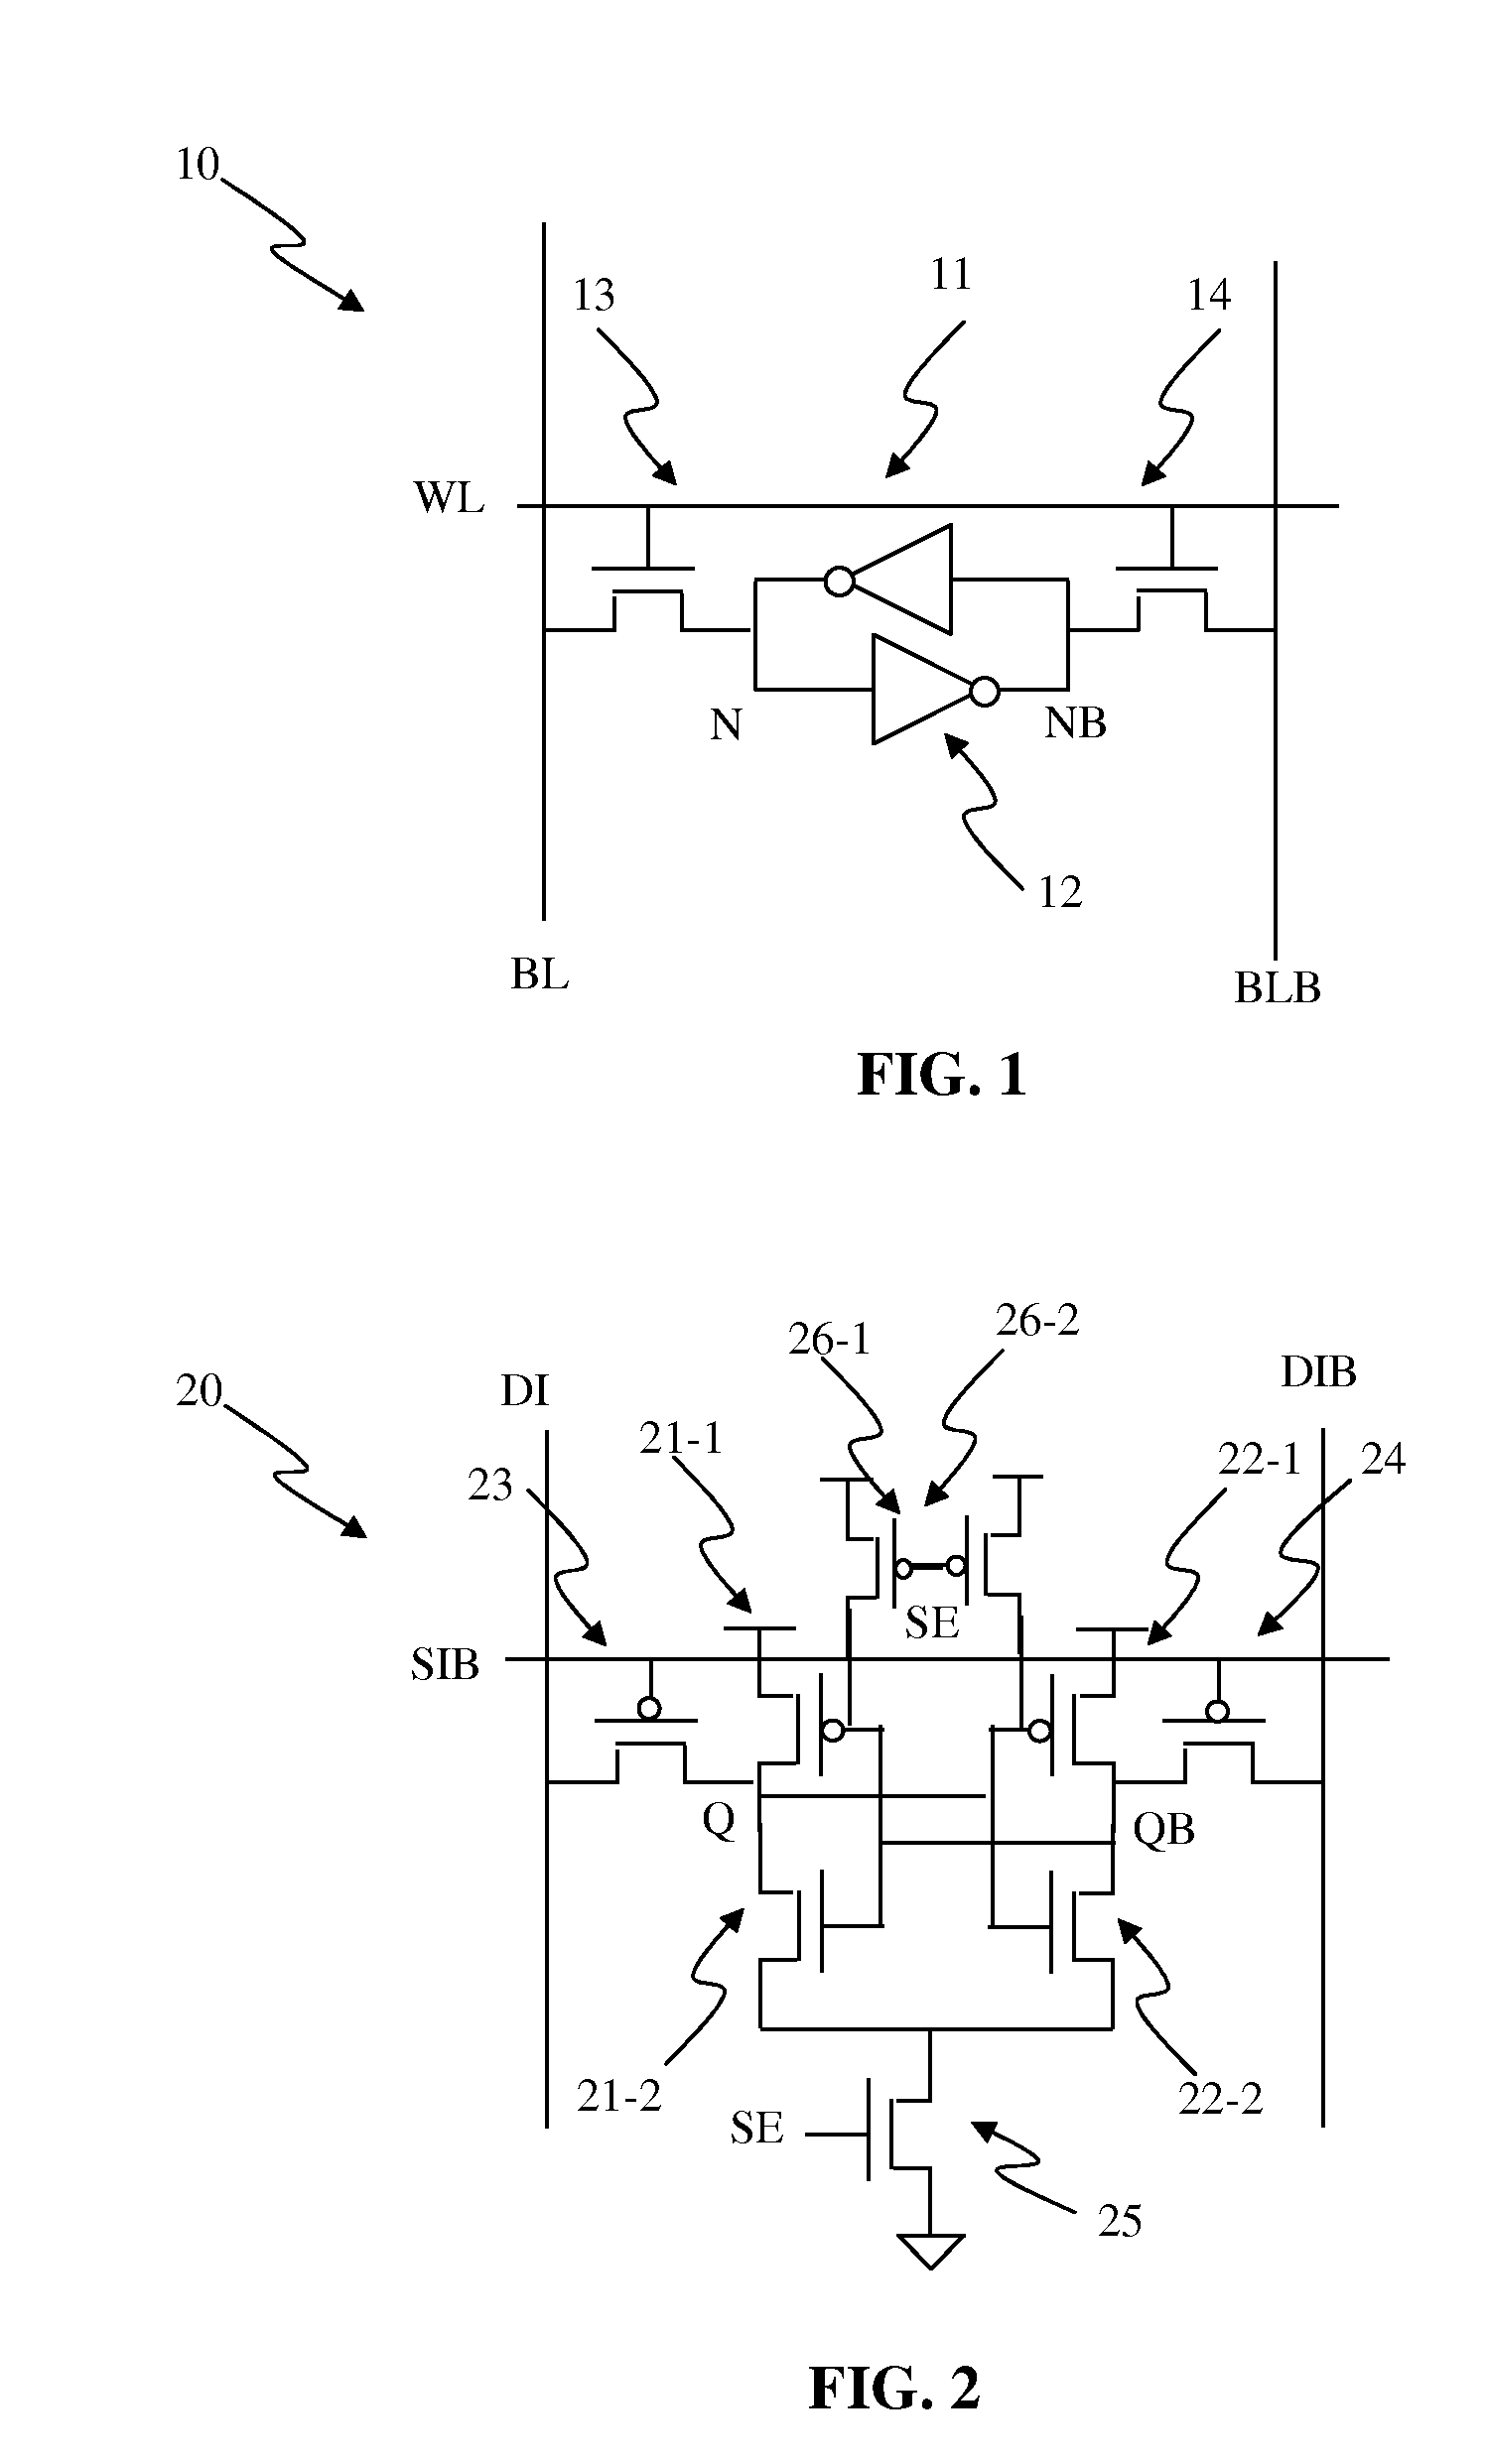 Circuits and Methods of a Self-Timed High Speed SRAM